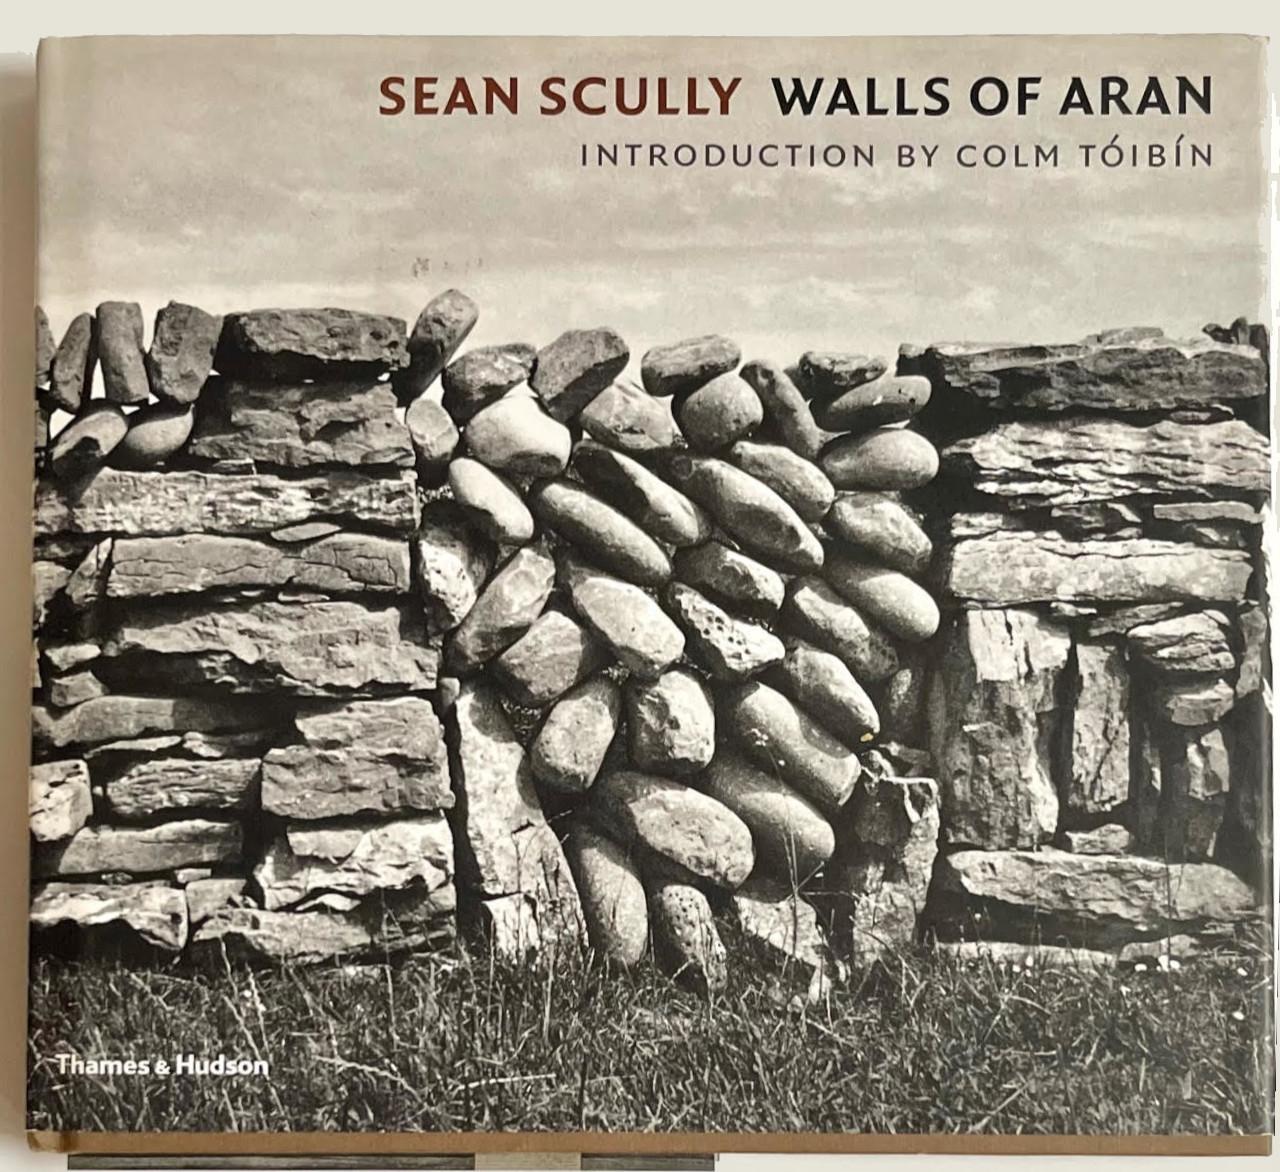 Sean Scully
Walls of Aran (Hand signed and inscribed by BOTH Sean Scully and Colm Toibin), 2007
Hardback monograph with book jacket 
Hand signed and personally inscribed to Kevin by BOTH Sean Scully and Colm Toibin
9 1/2 × 10 1/2 × 1 inches

Signed